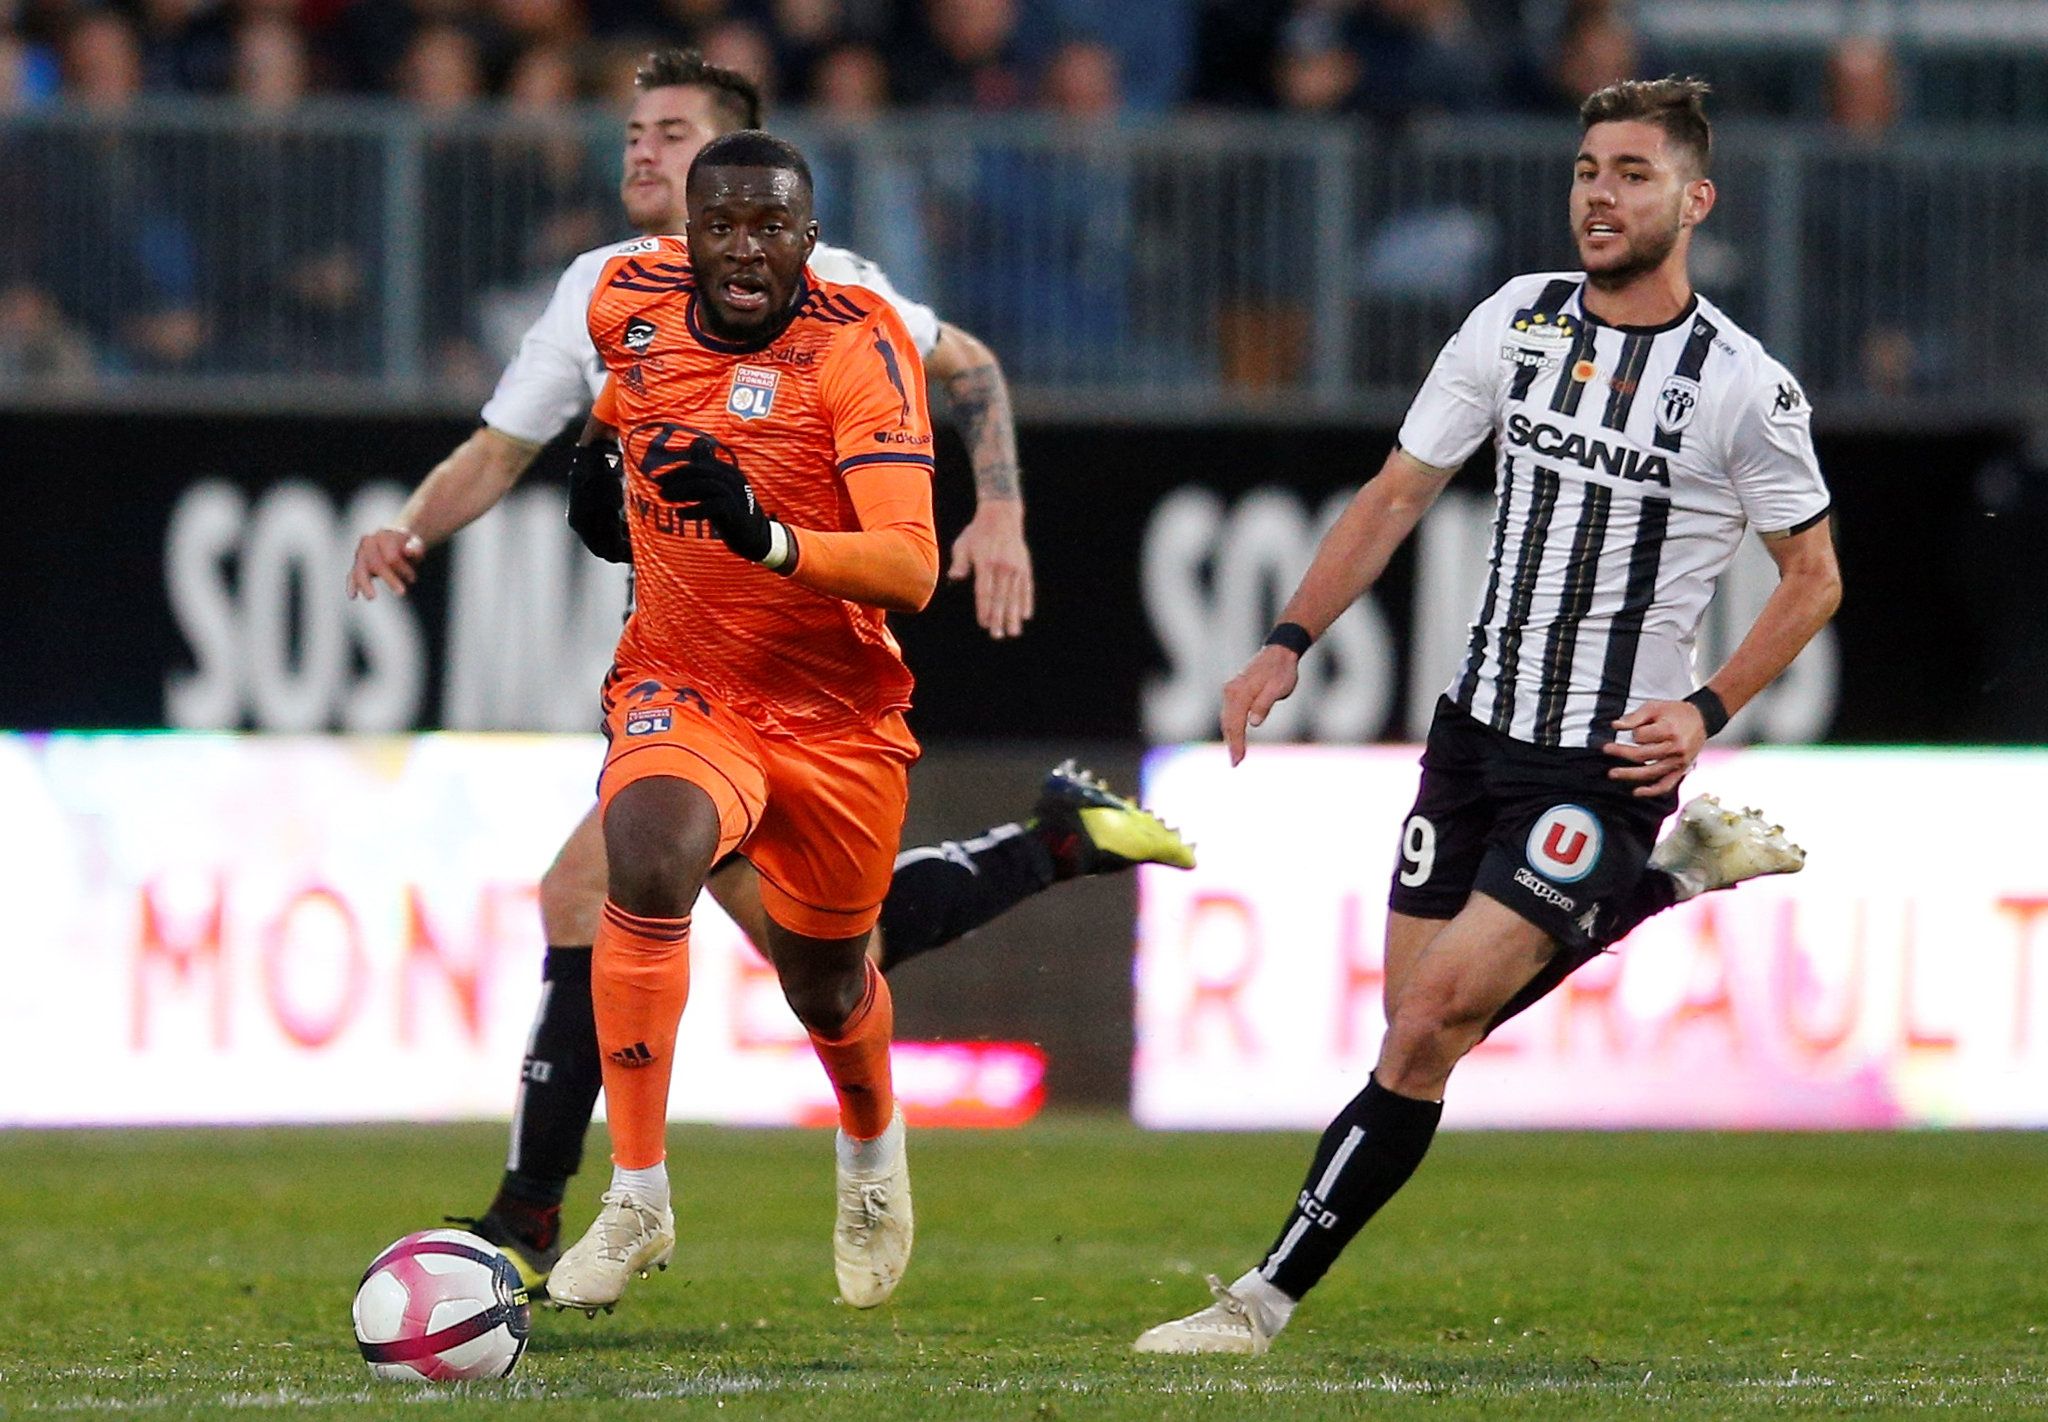 Soccer Football - Ligue 1 - Angers v Olympique Lyonnais - Stade Raymond Kopa, Angers, France - October 27, 2018  Lyon's Tanguy Ndombele in action with Angers' Cristian Lopez                 REUTERS/Stephane Mahe